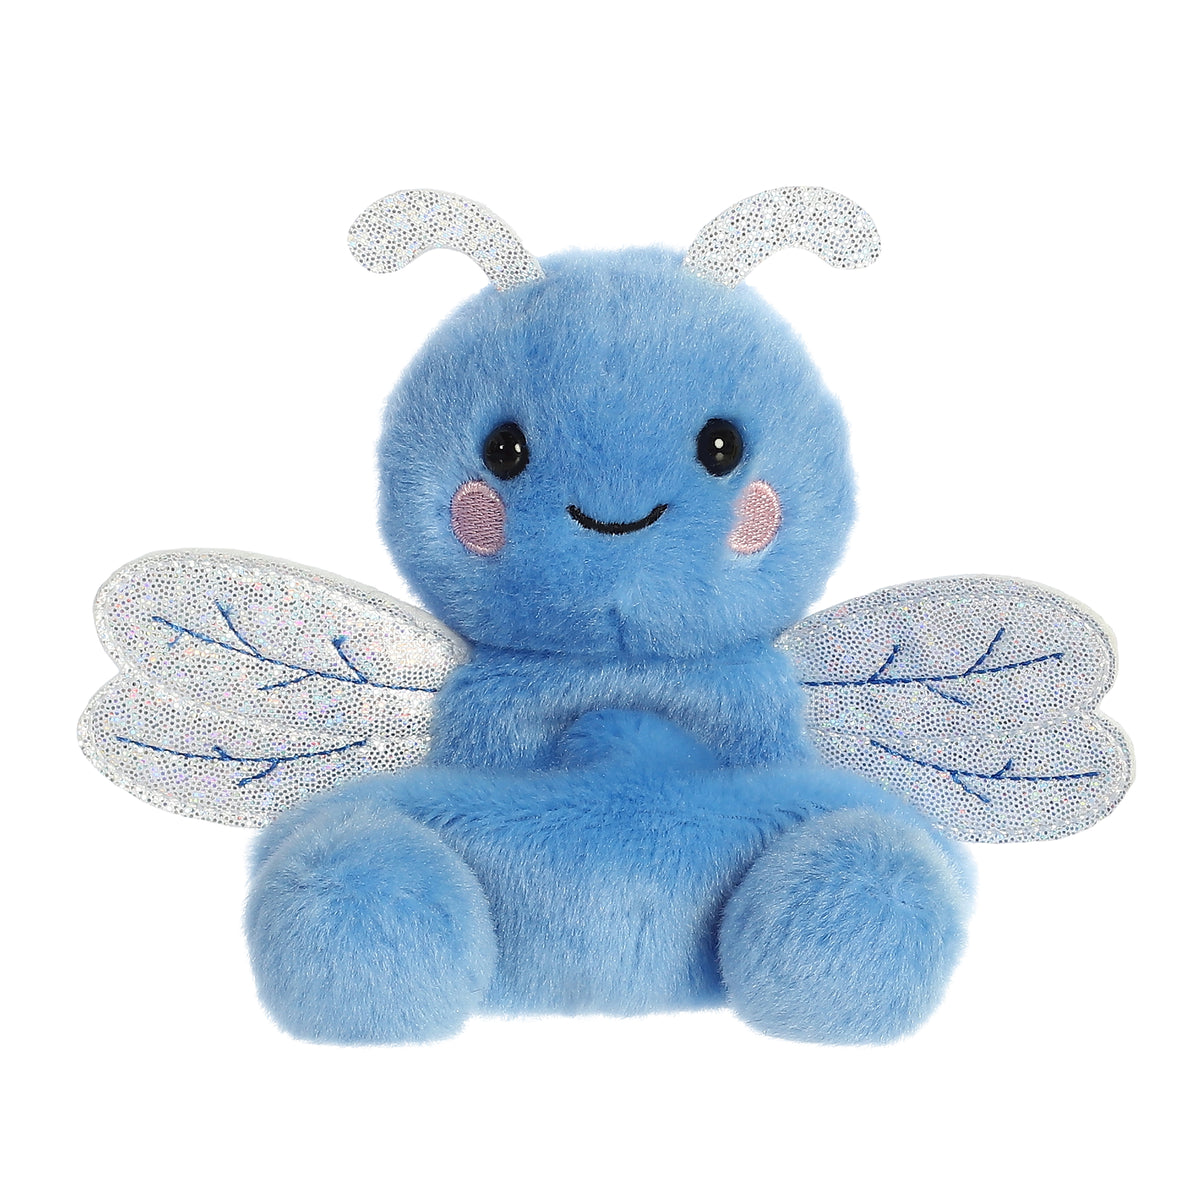 Dart Dragonfly plush from Palm Pals, with glittery wings and an azure body, is small dragonfly plush that fits in your palm